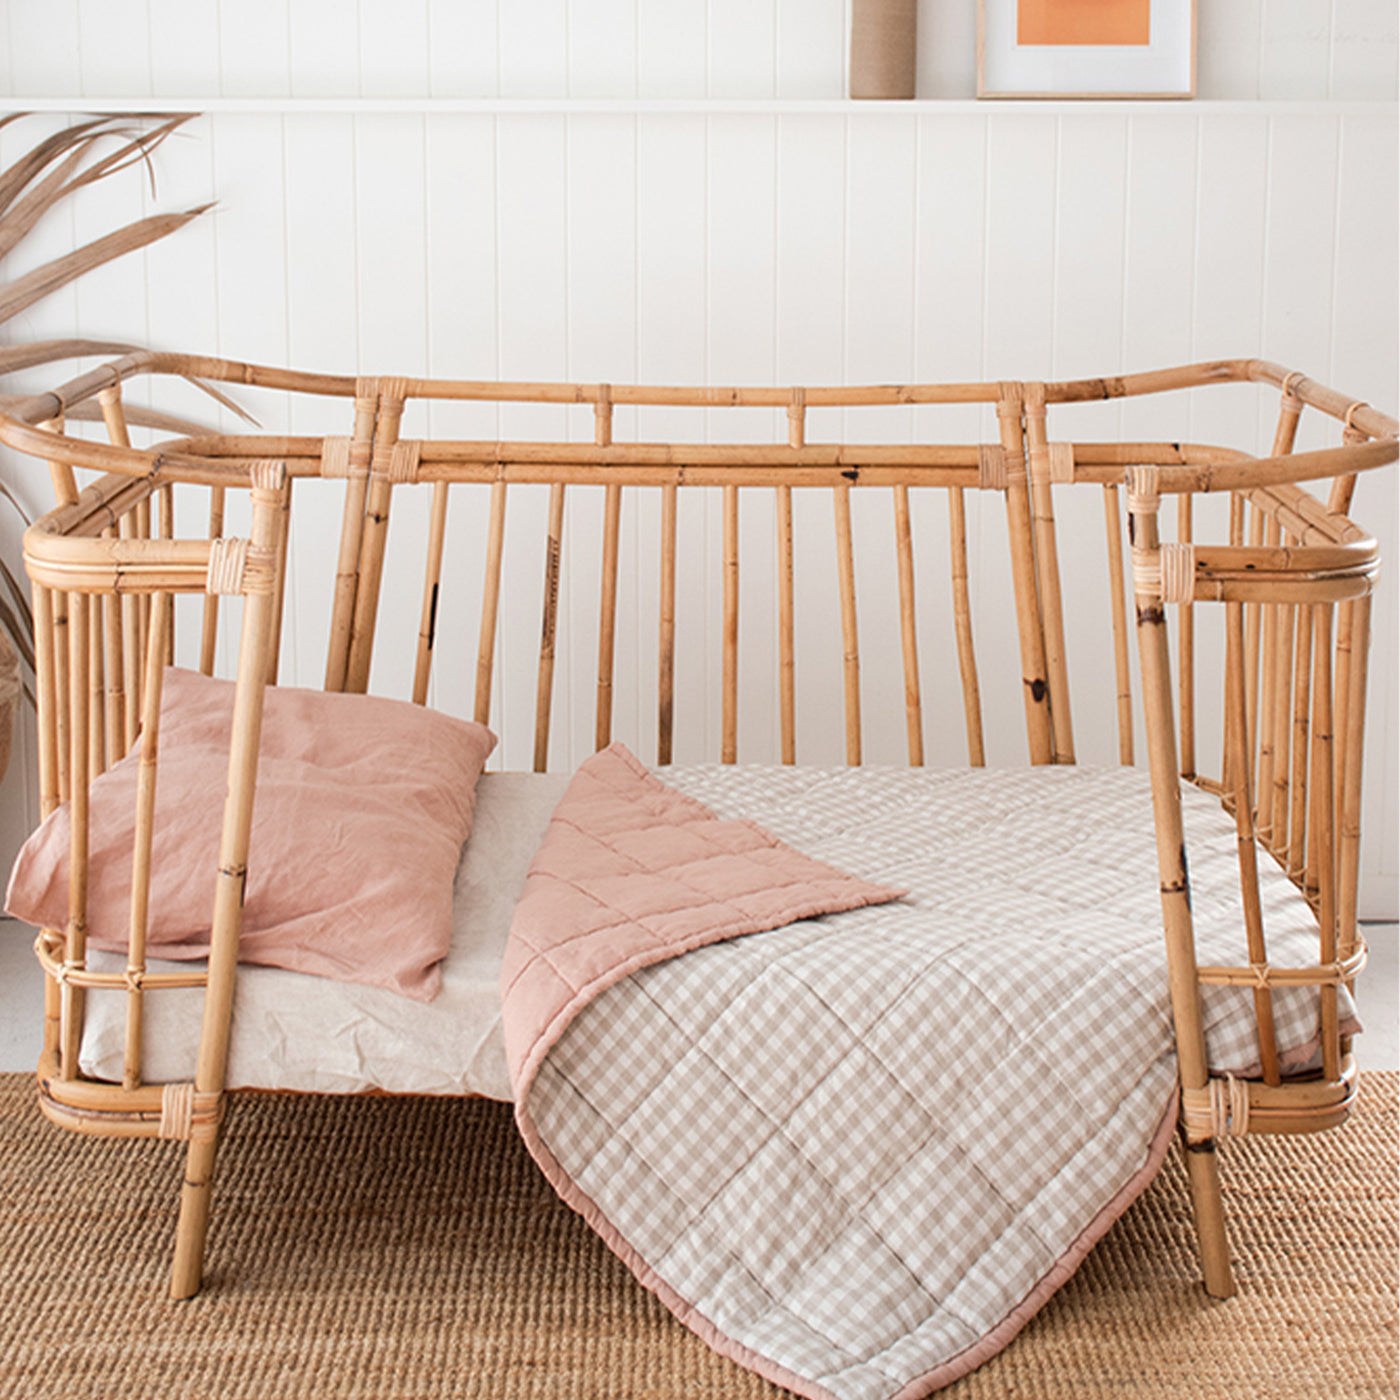 French Flax Linen Cot Quilt/Play Mat in Clay/Beige Gingham